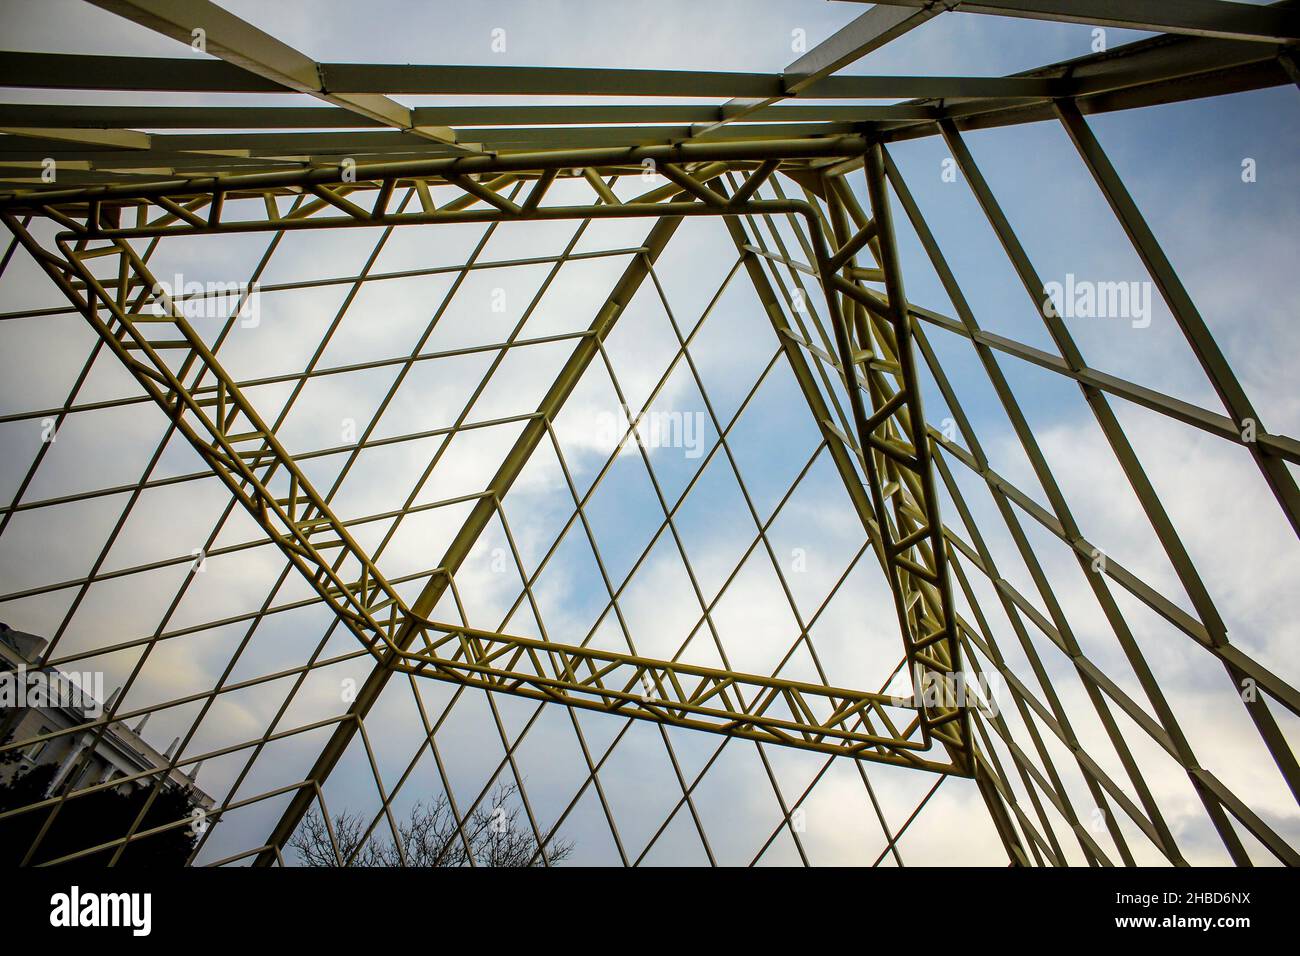 An unfinished and abandoned metal pyramid shaped building. Iron structure inside view. Stock Photo